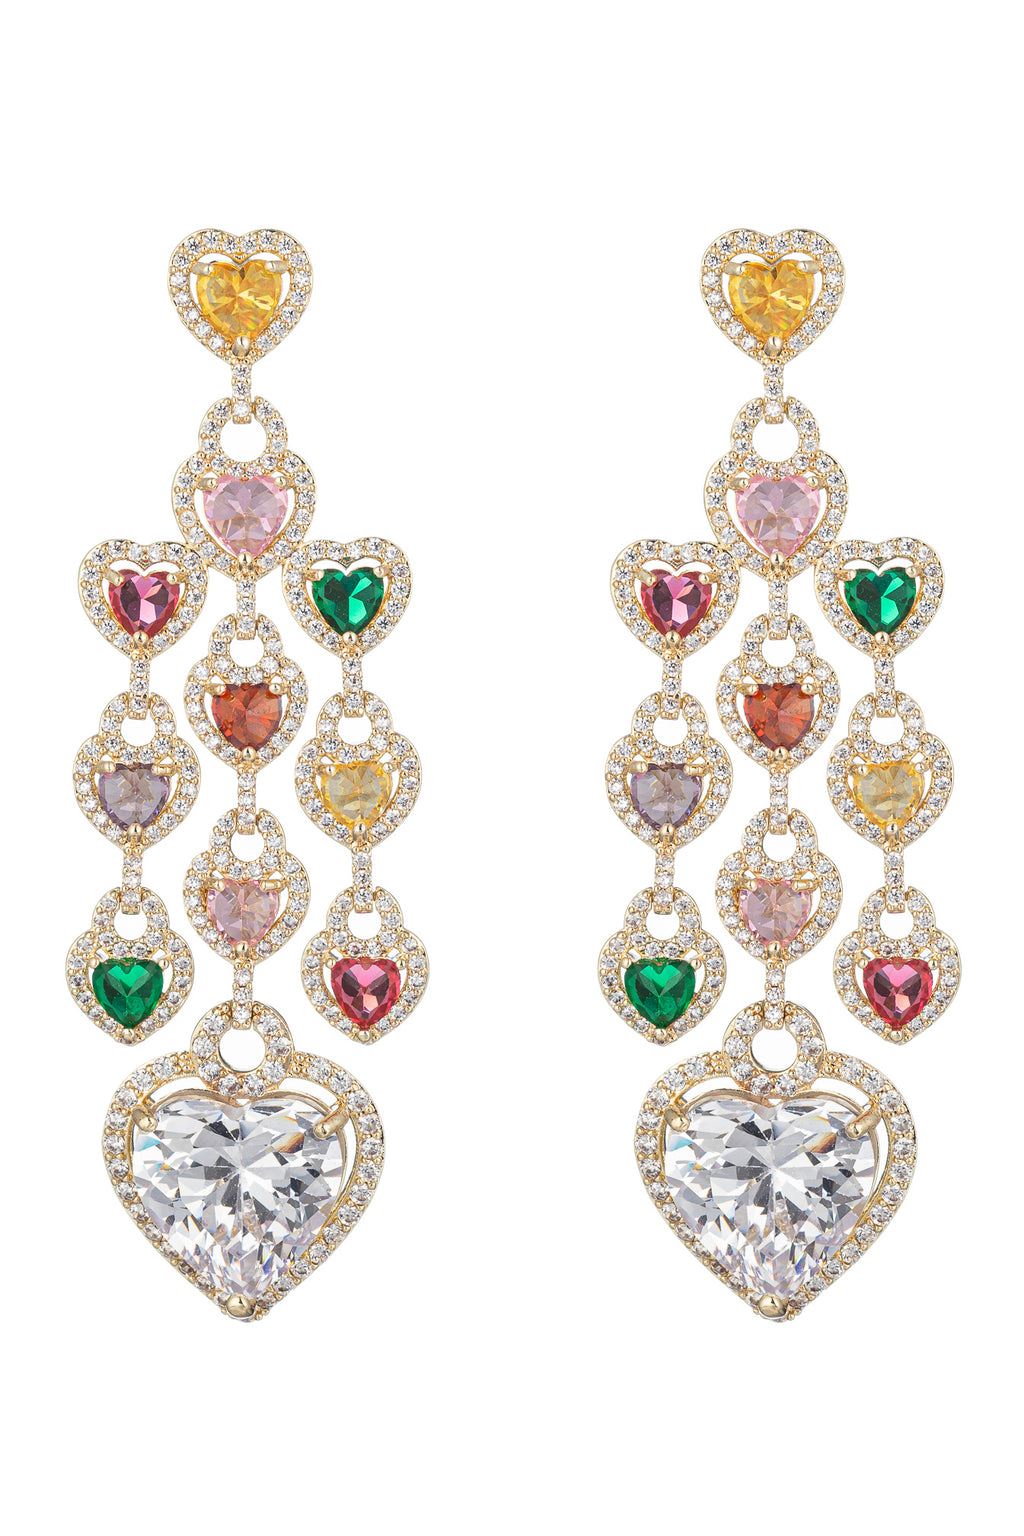 Gold tone brass heart pendant earrings studded with CZ crystals.